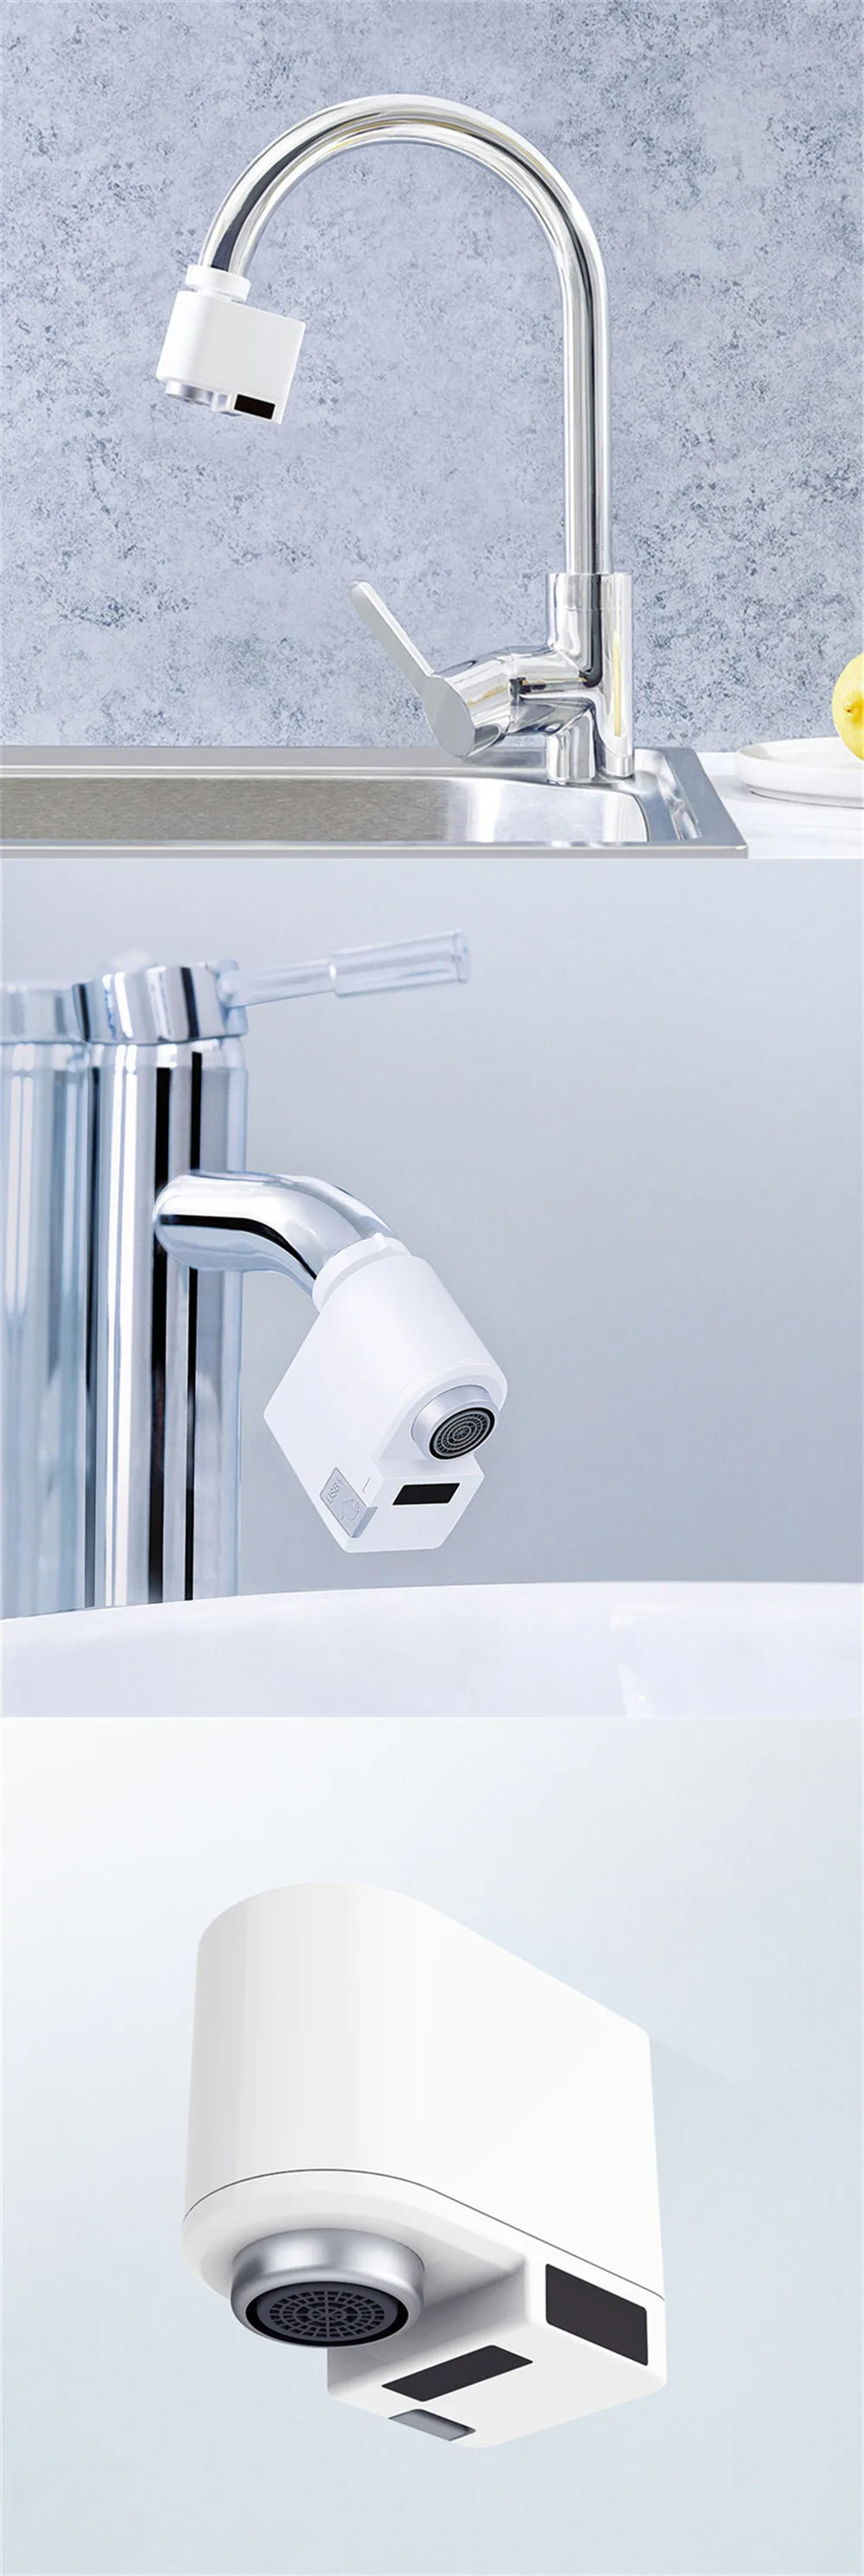 Xiaomi ZJ Automatic Sense Infrared Induction Water Saving Device Intelligent induction For Kitchen Bathroom Sink Faucet Water (1)